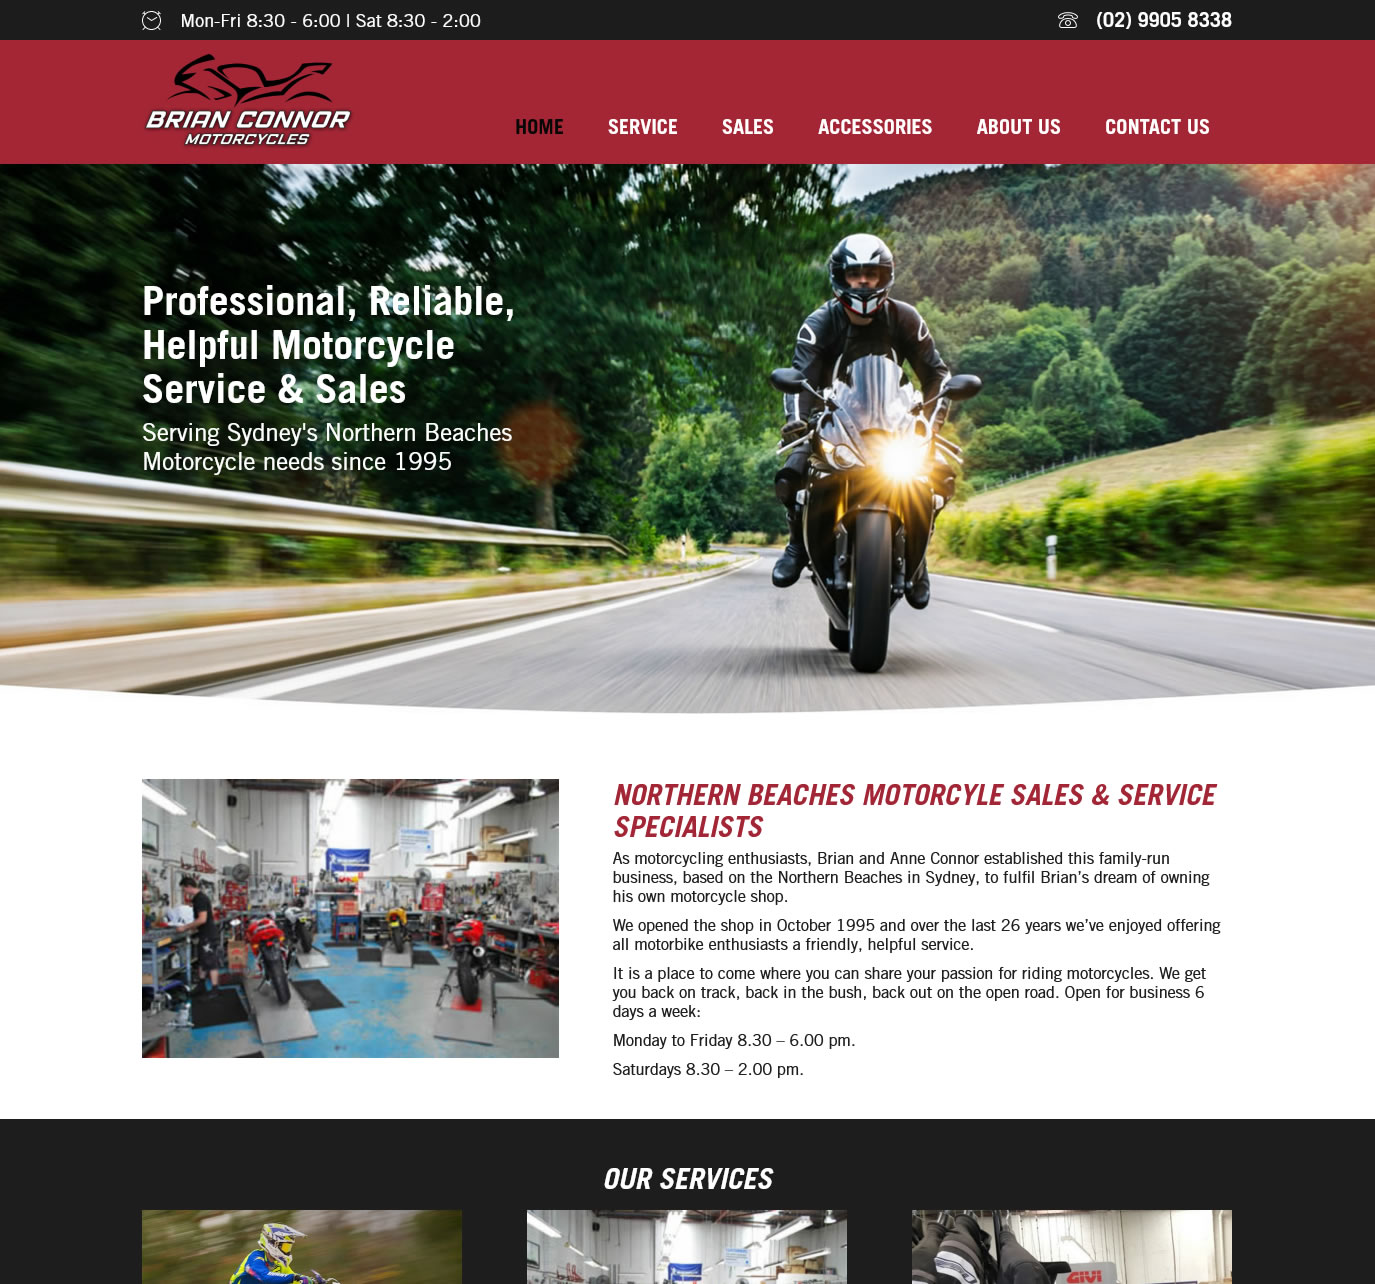 Brian Connor Motorcycles